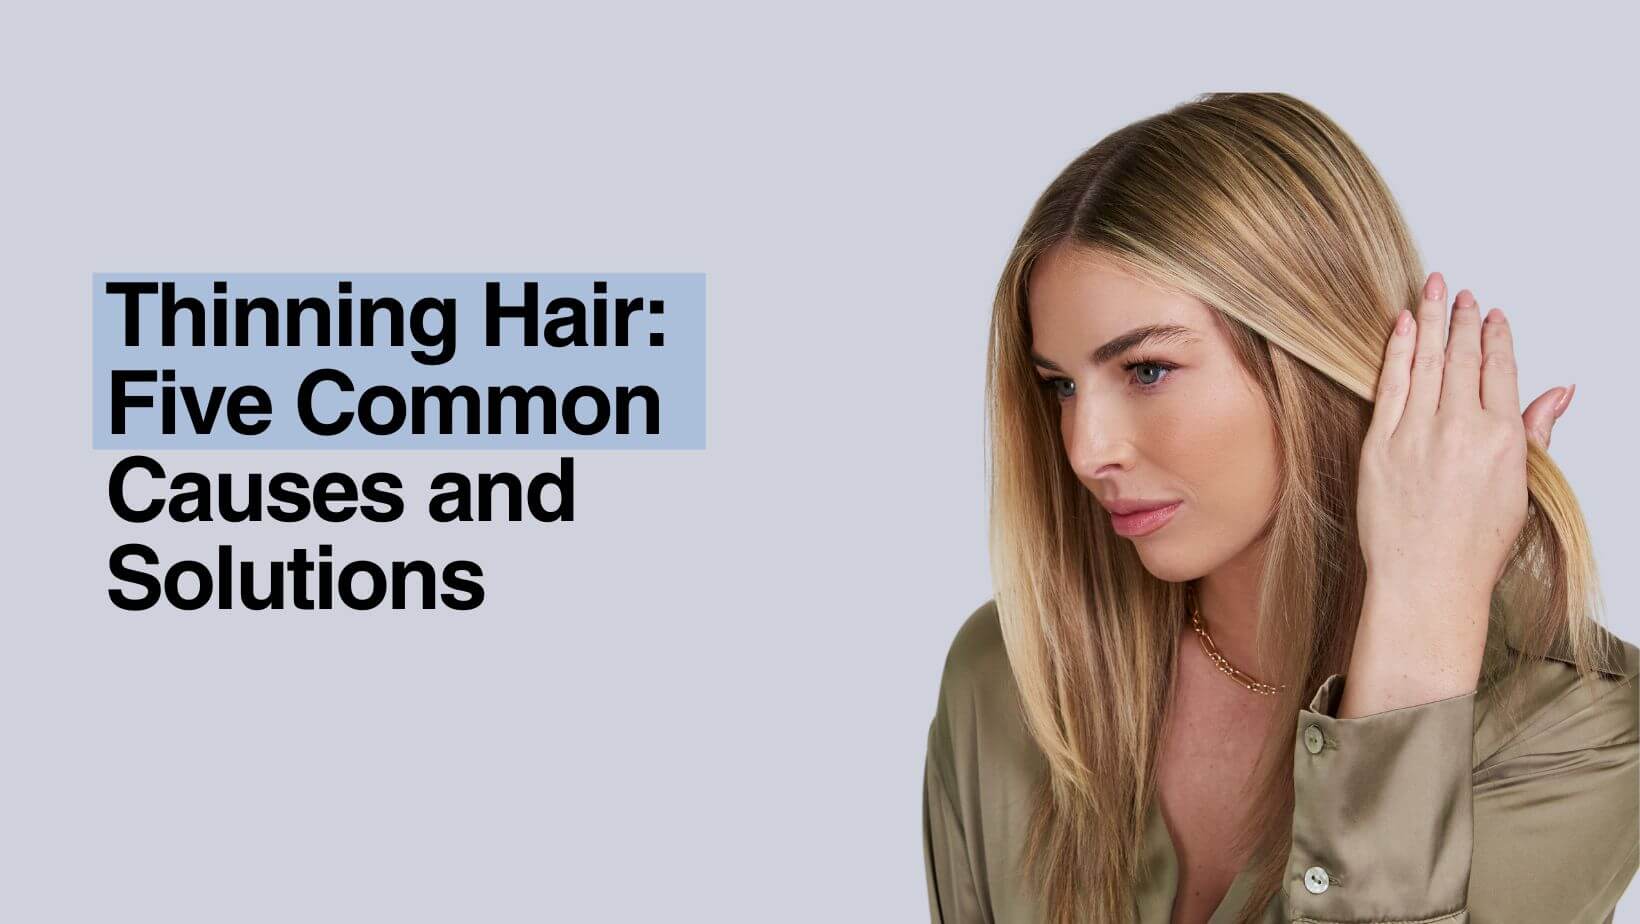 Thinning Hair: Five common causes and solutions